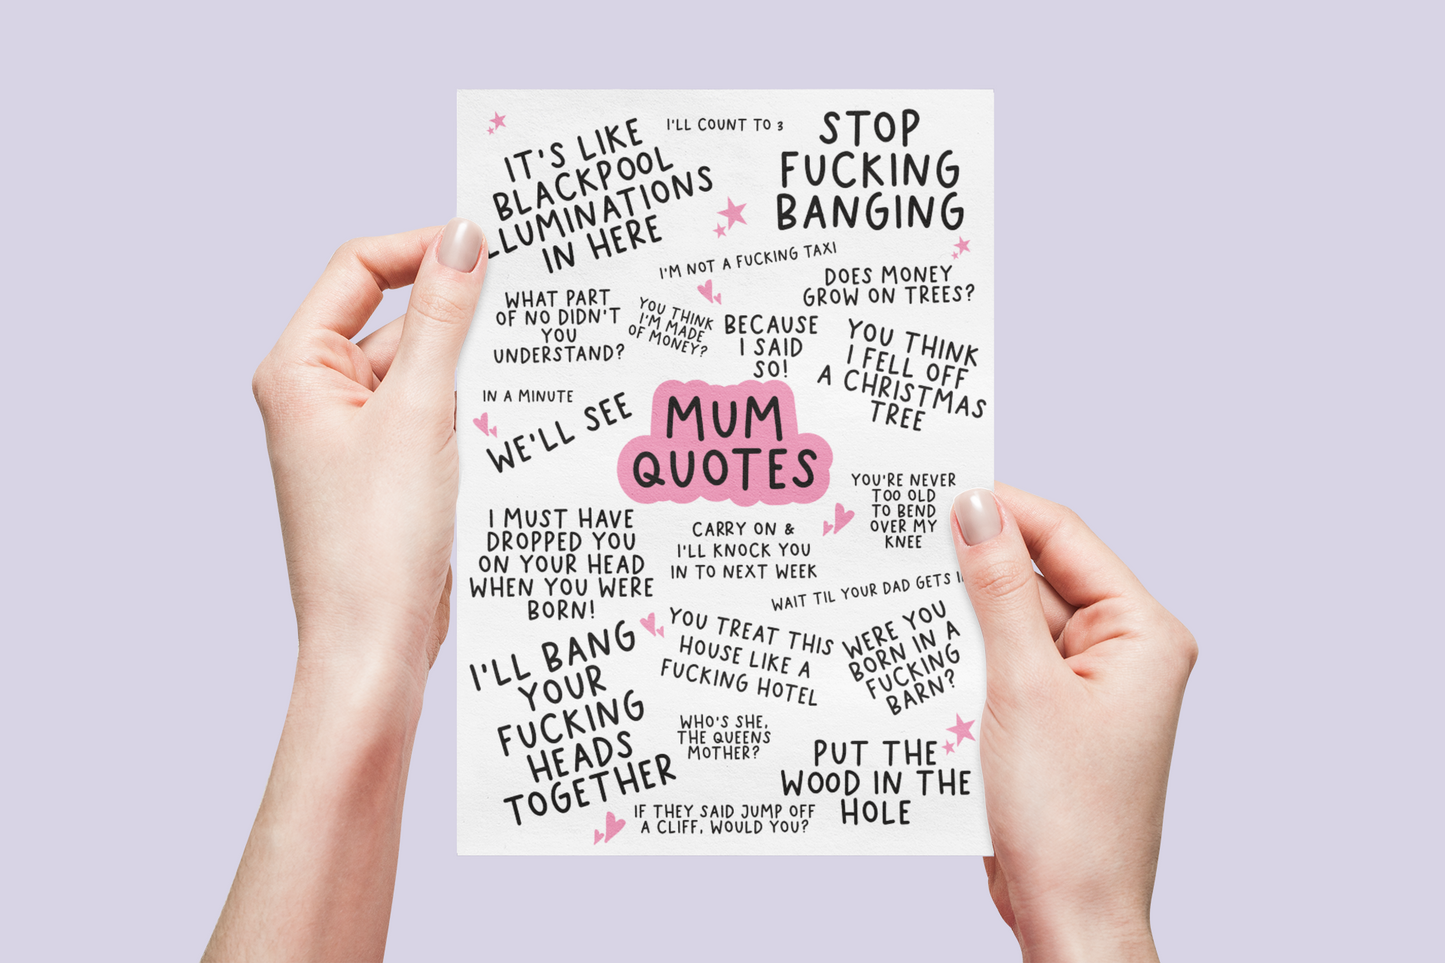 Greetings card featuring famous mum quotes which include 'stop fucking banging, it's like blackpool illuminations in here & i'll bang your fucking heads together'.